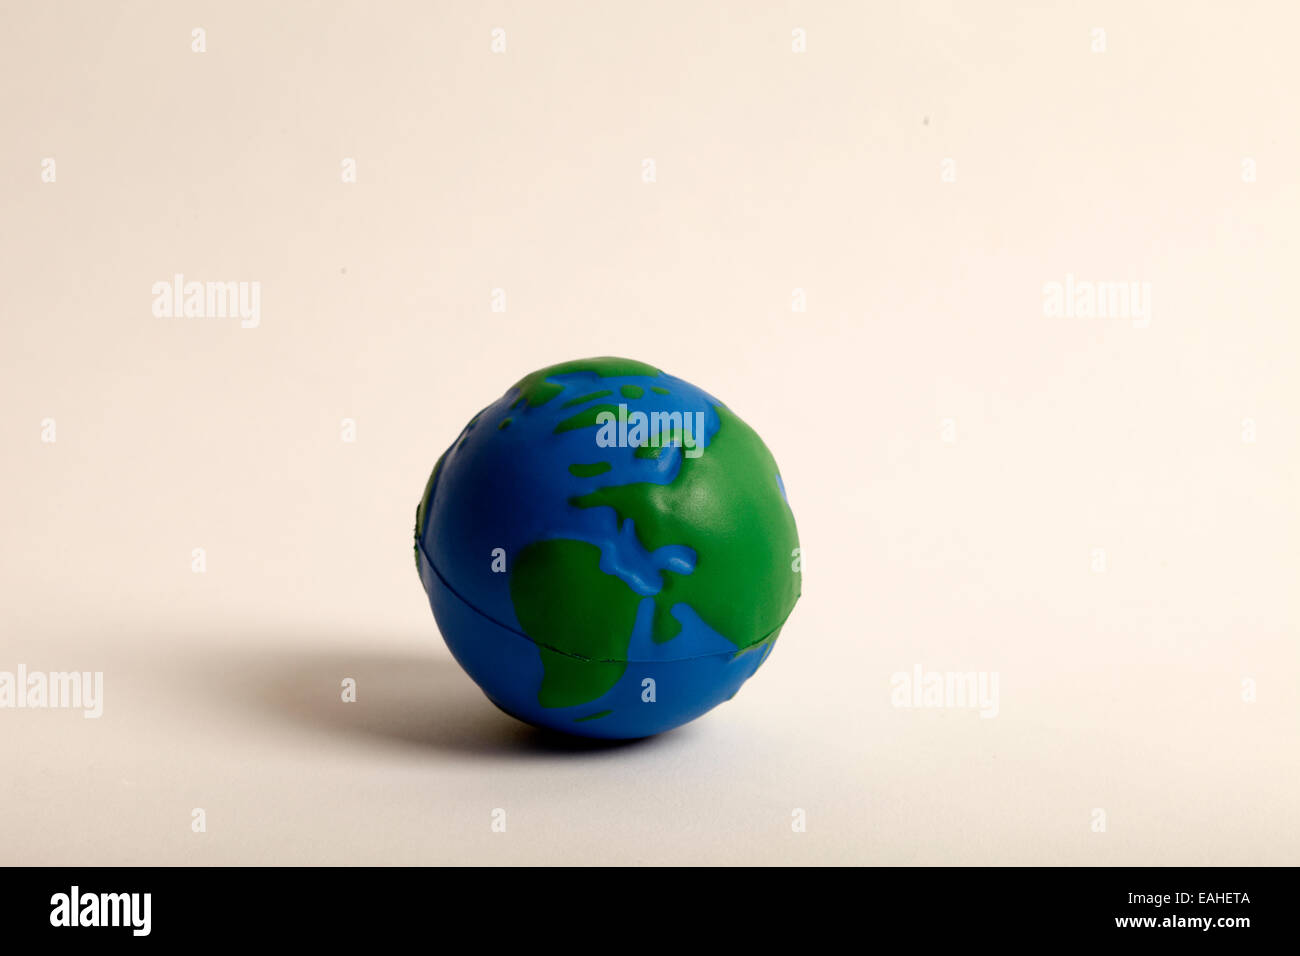 rubber ball depicting a globe or world Stock Photo